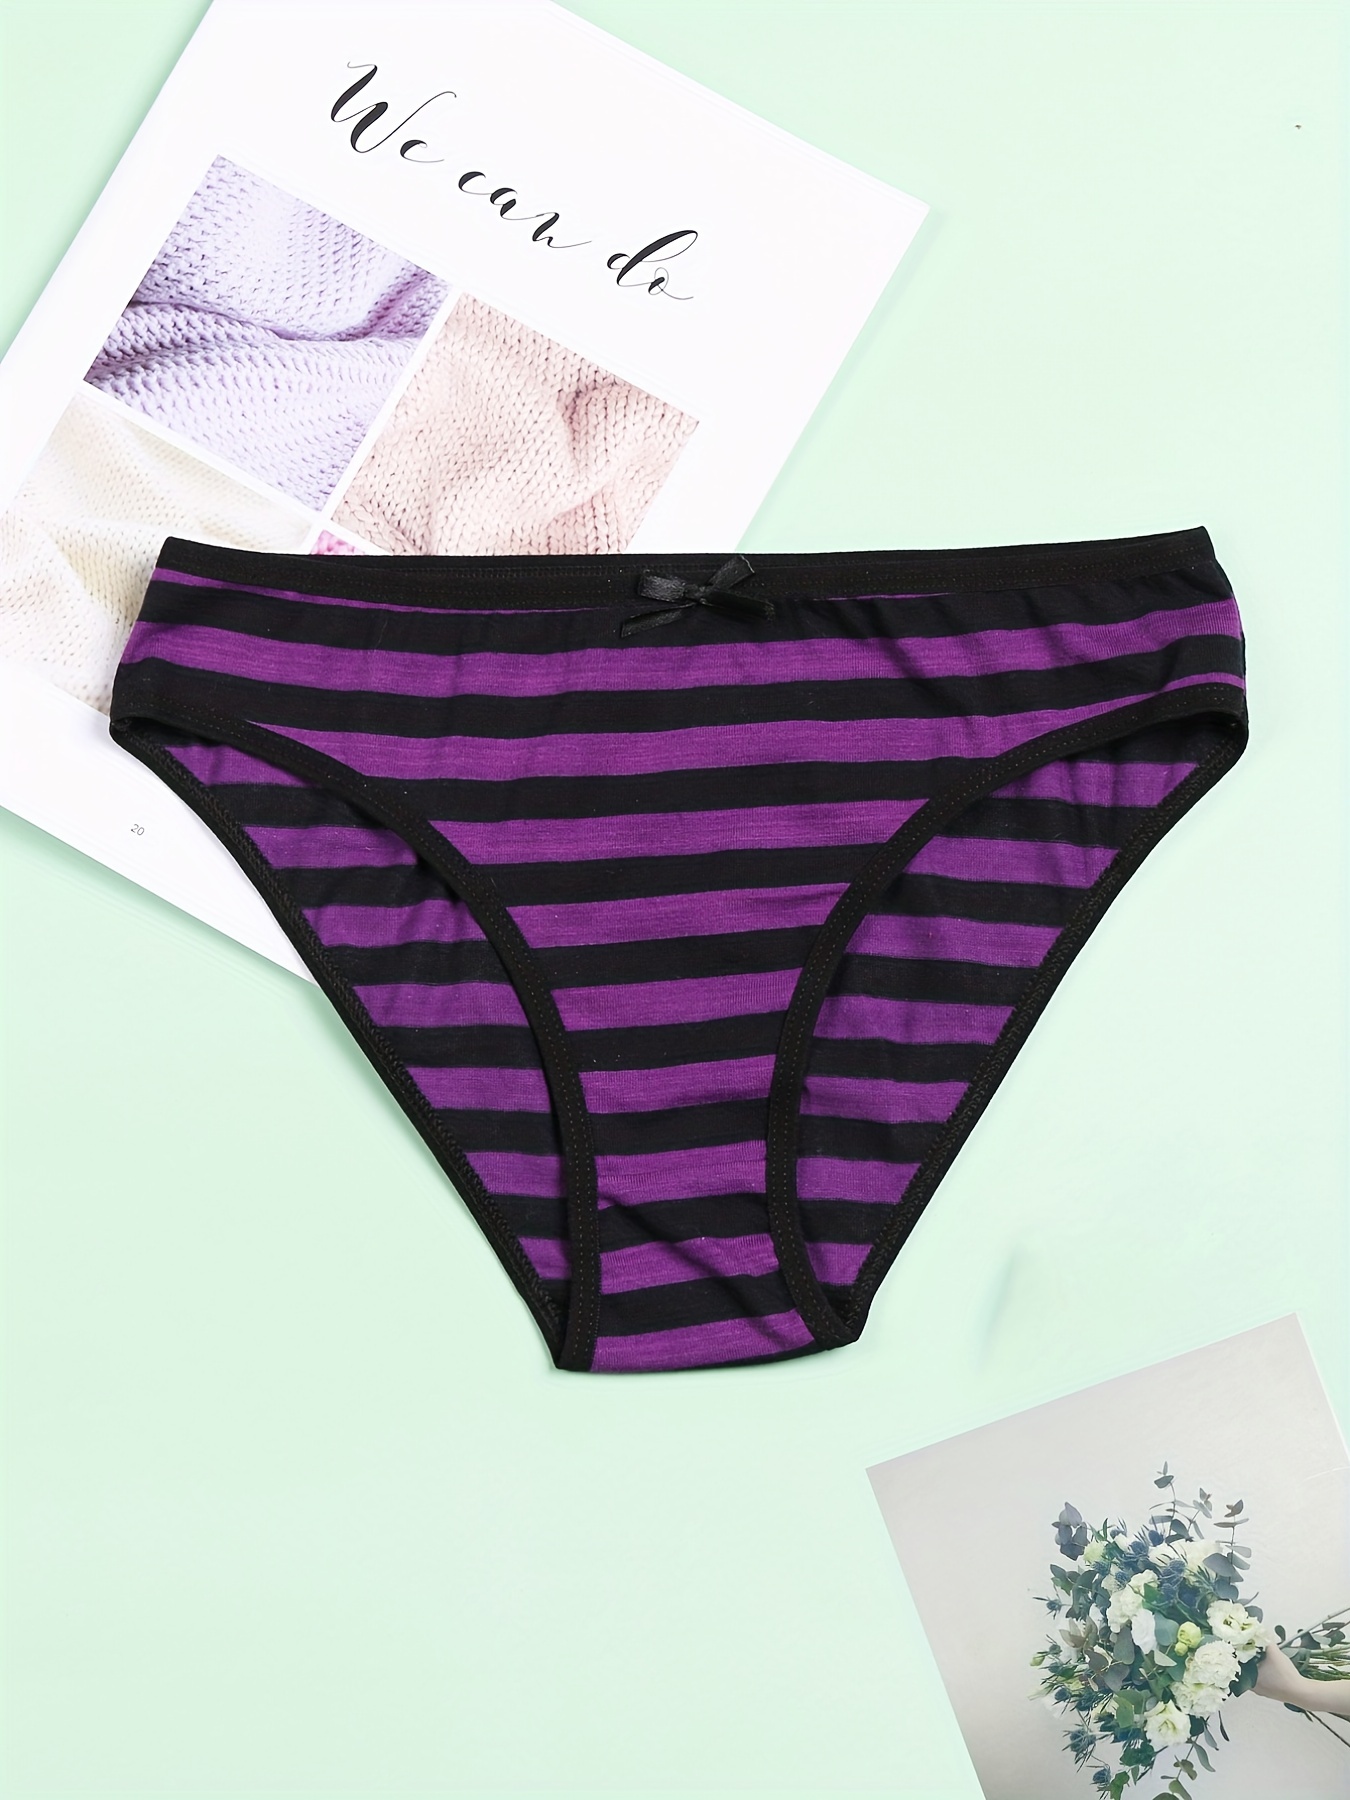 Women's Striped Panties for Sale 